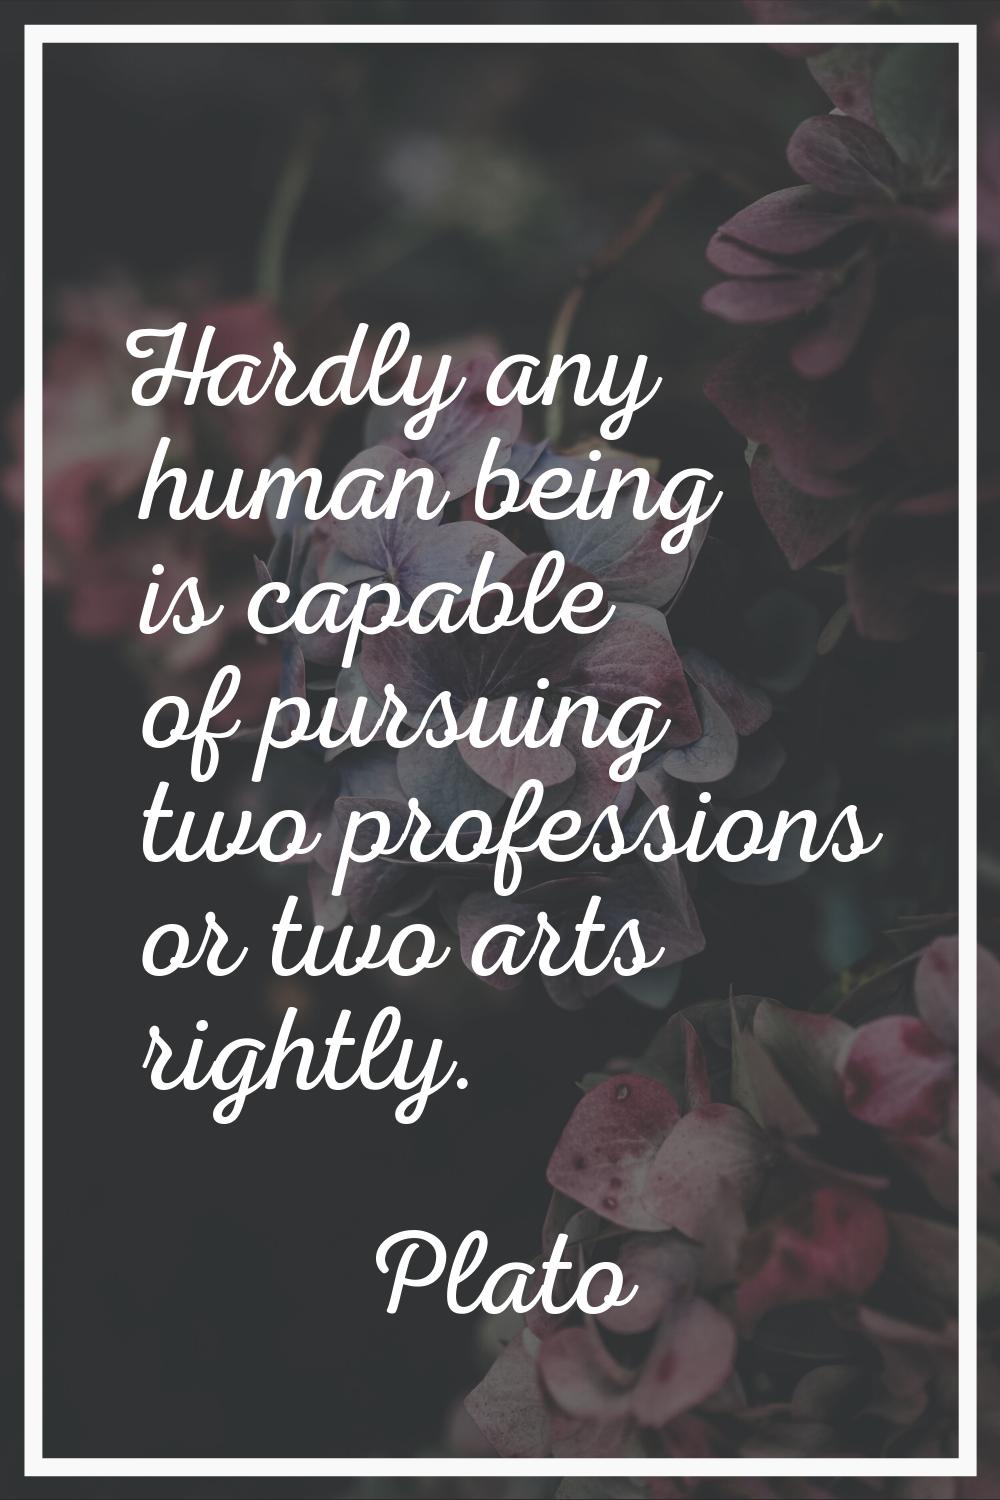 Hardly any human being is capable of pursuing two professions or two arts rightly.